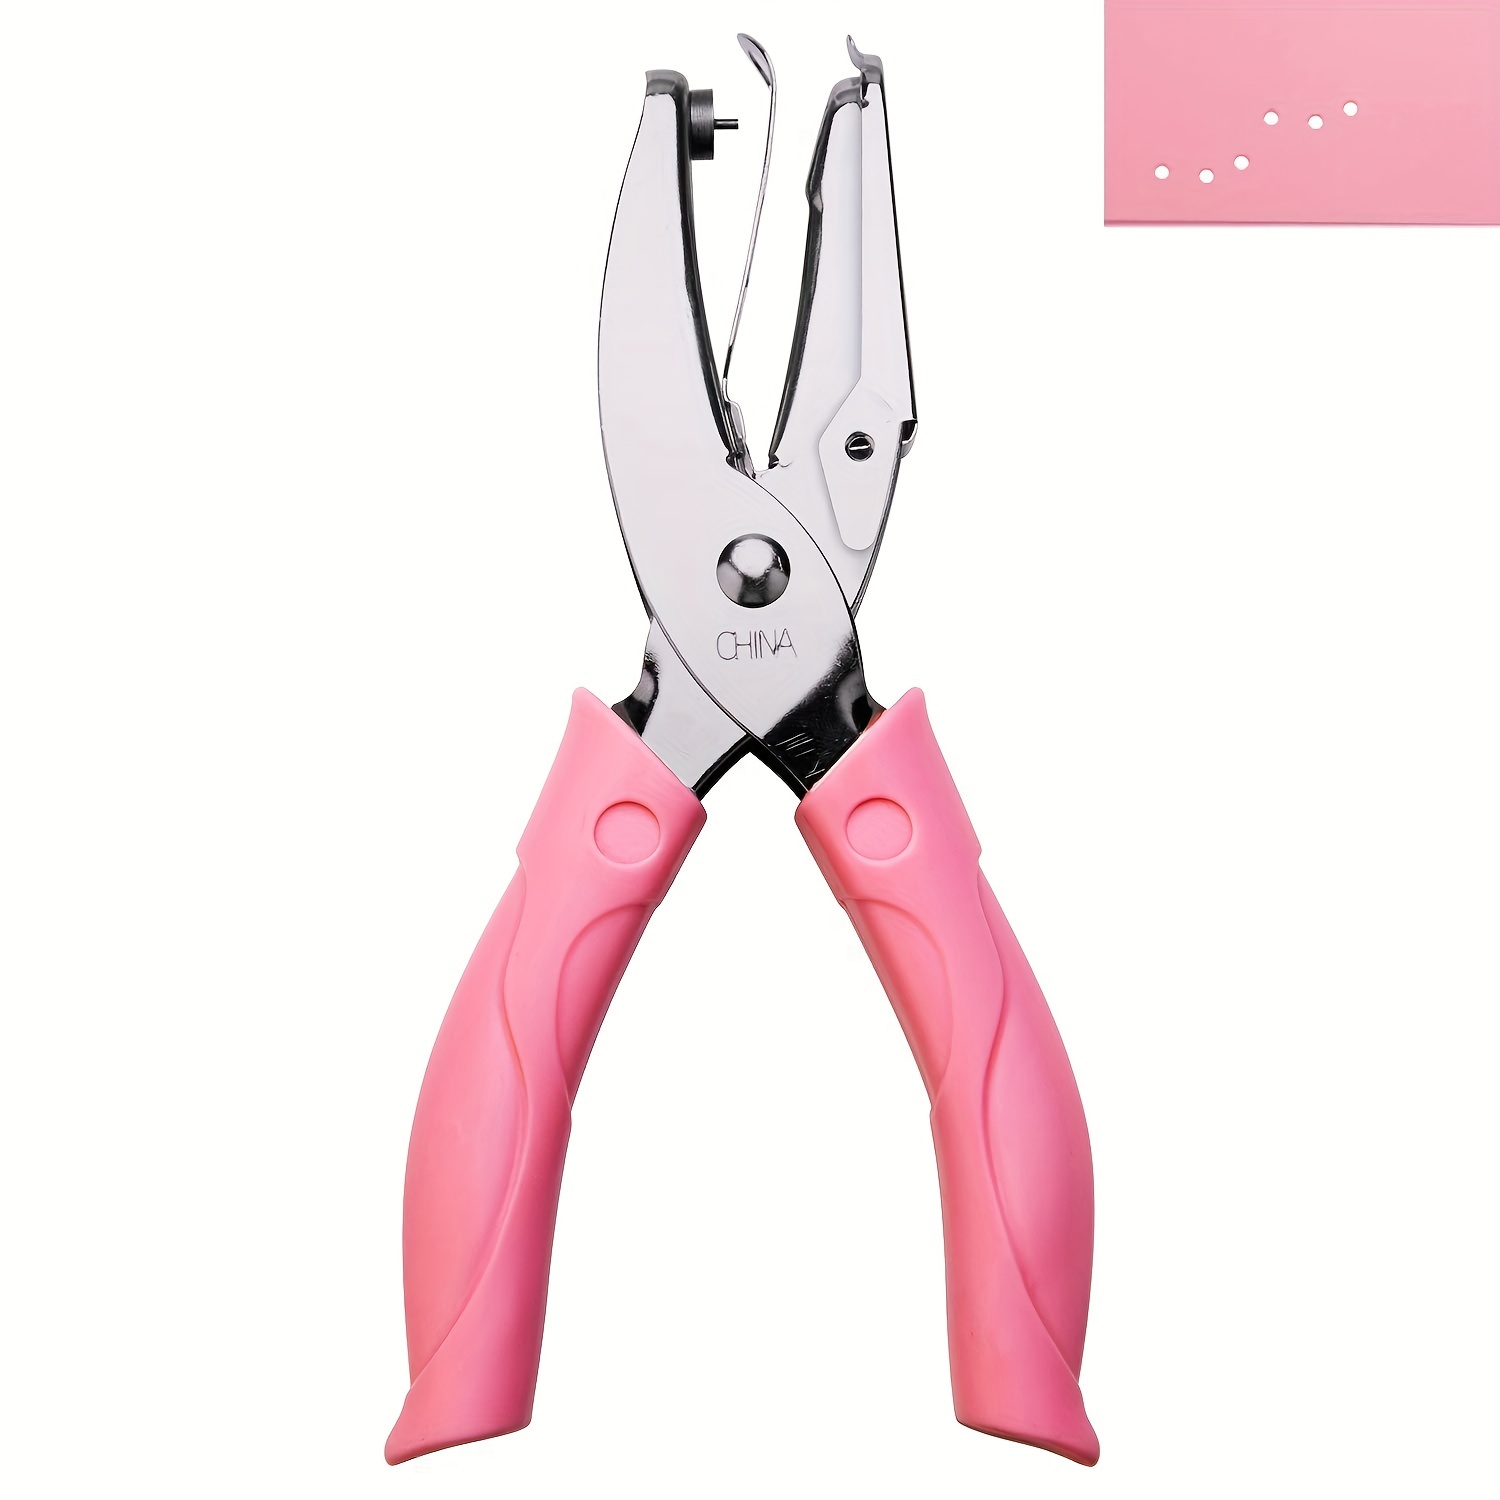 Circle Heart Star Shaped Hole Punch Pliers for Soft Grip Paper Hand  Puncher.